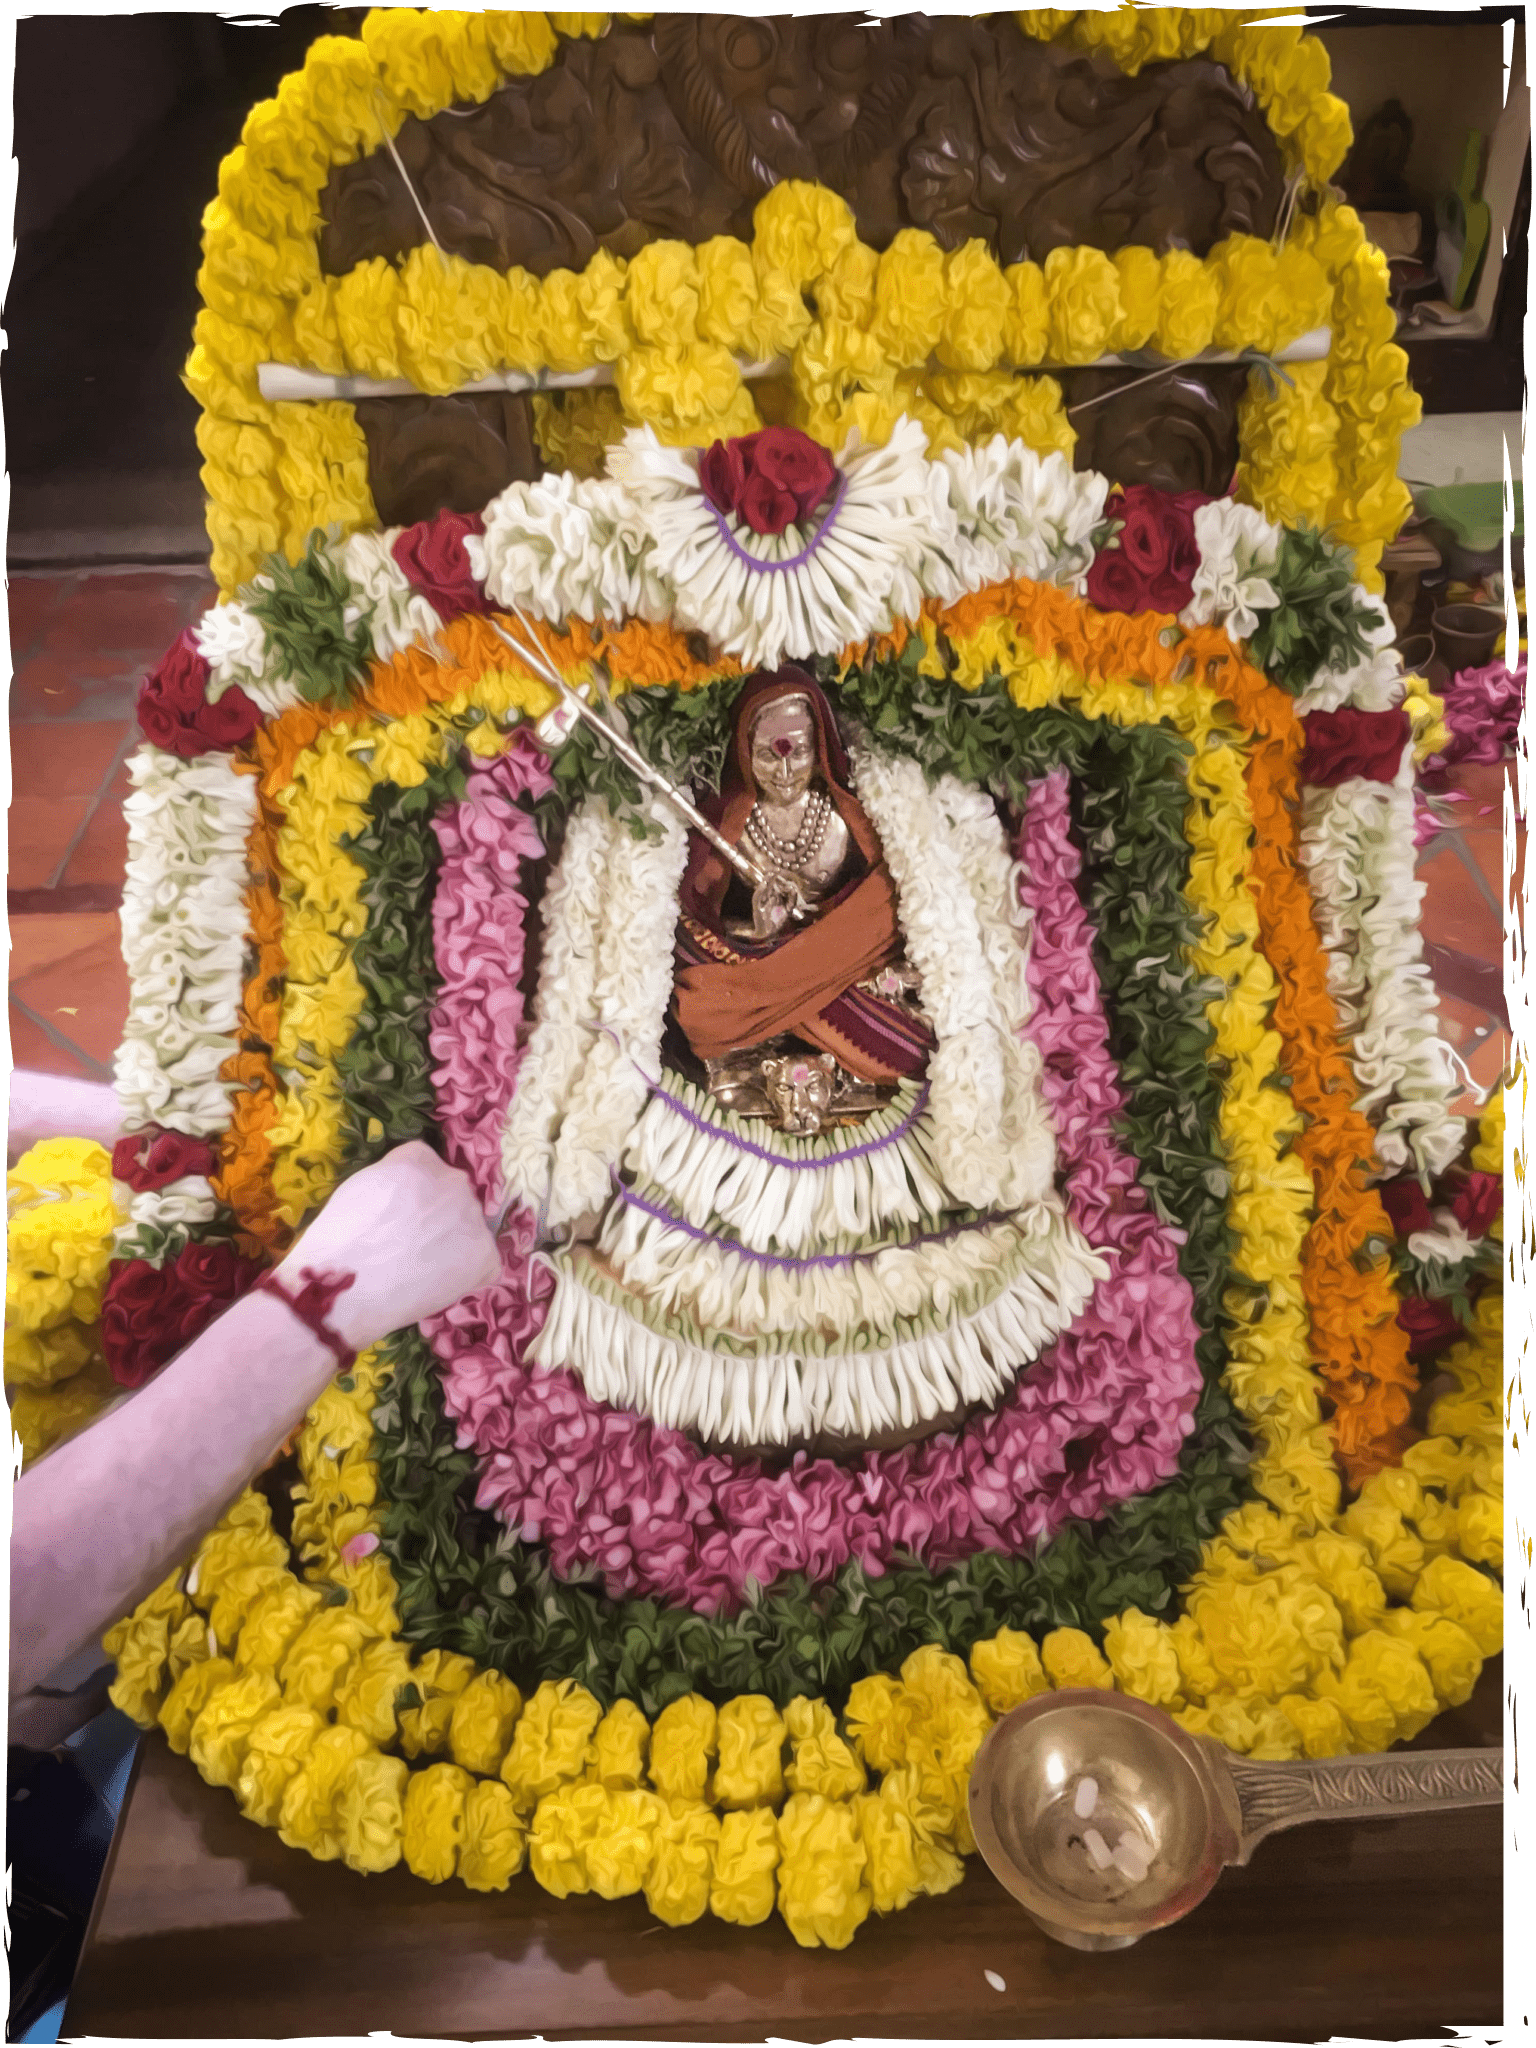 A beautifully decorated deity ready for pooja.